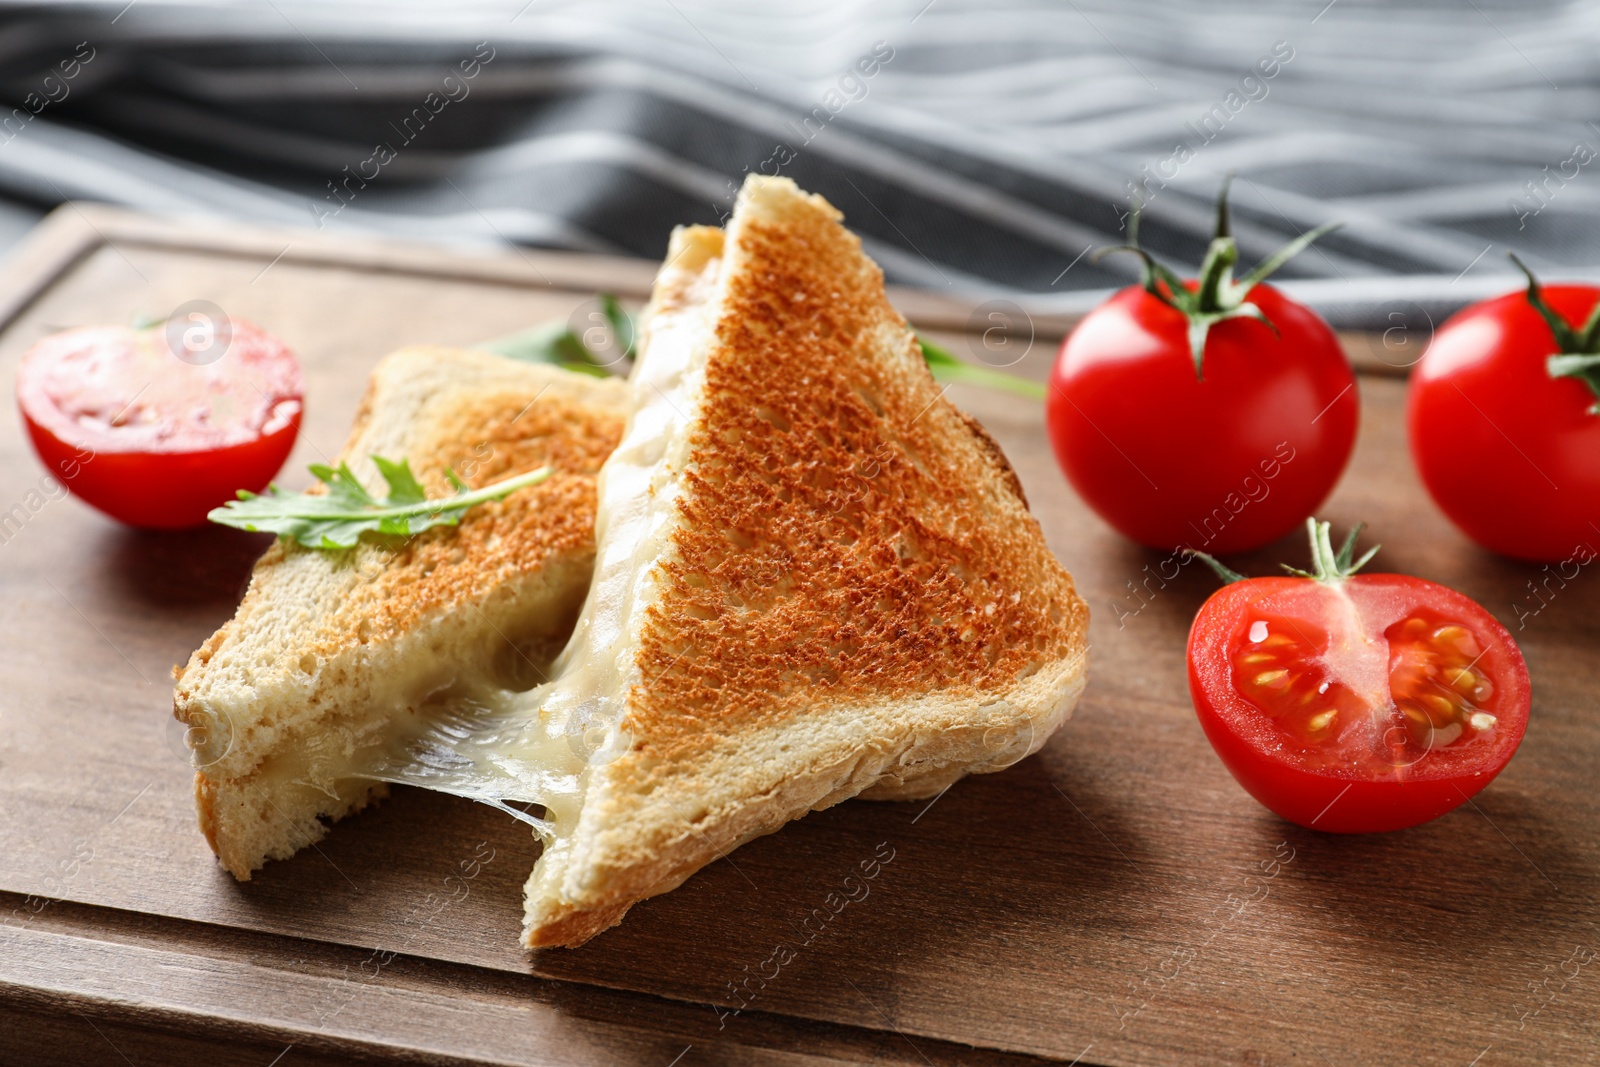 Image of Tasty toast sandwiches with cheese and tomatoes on wooden board